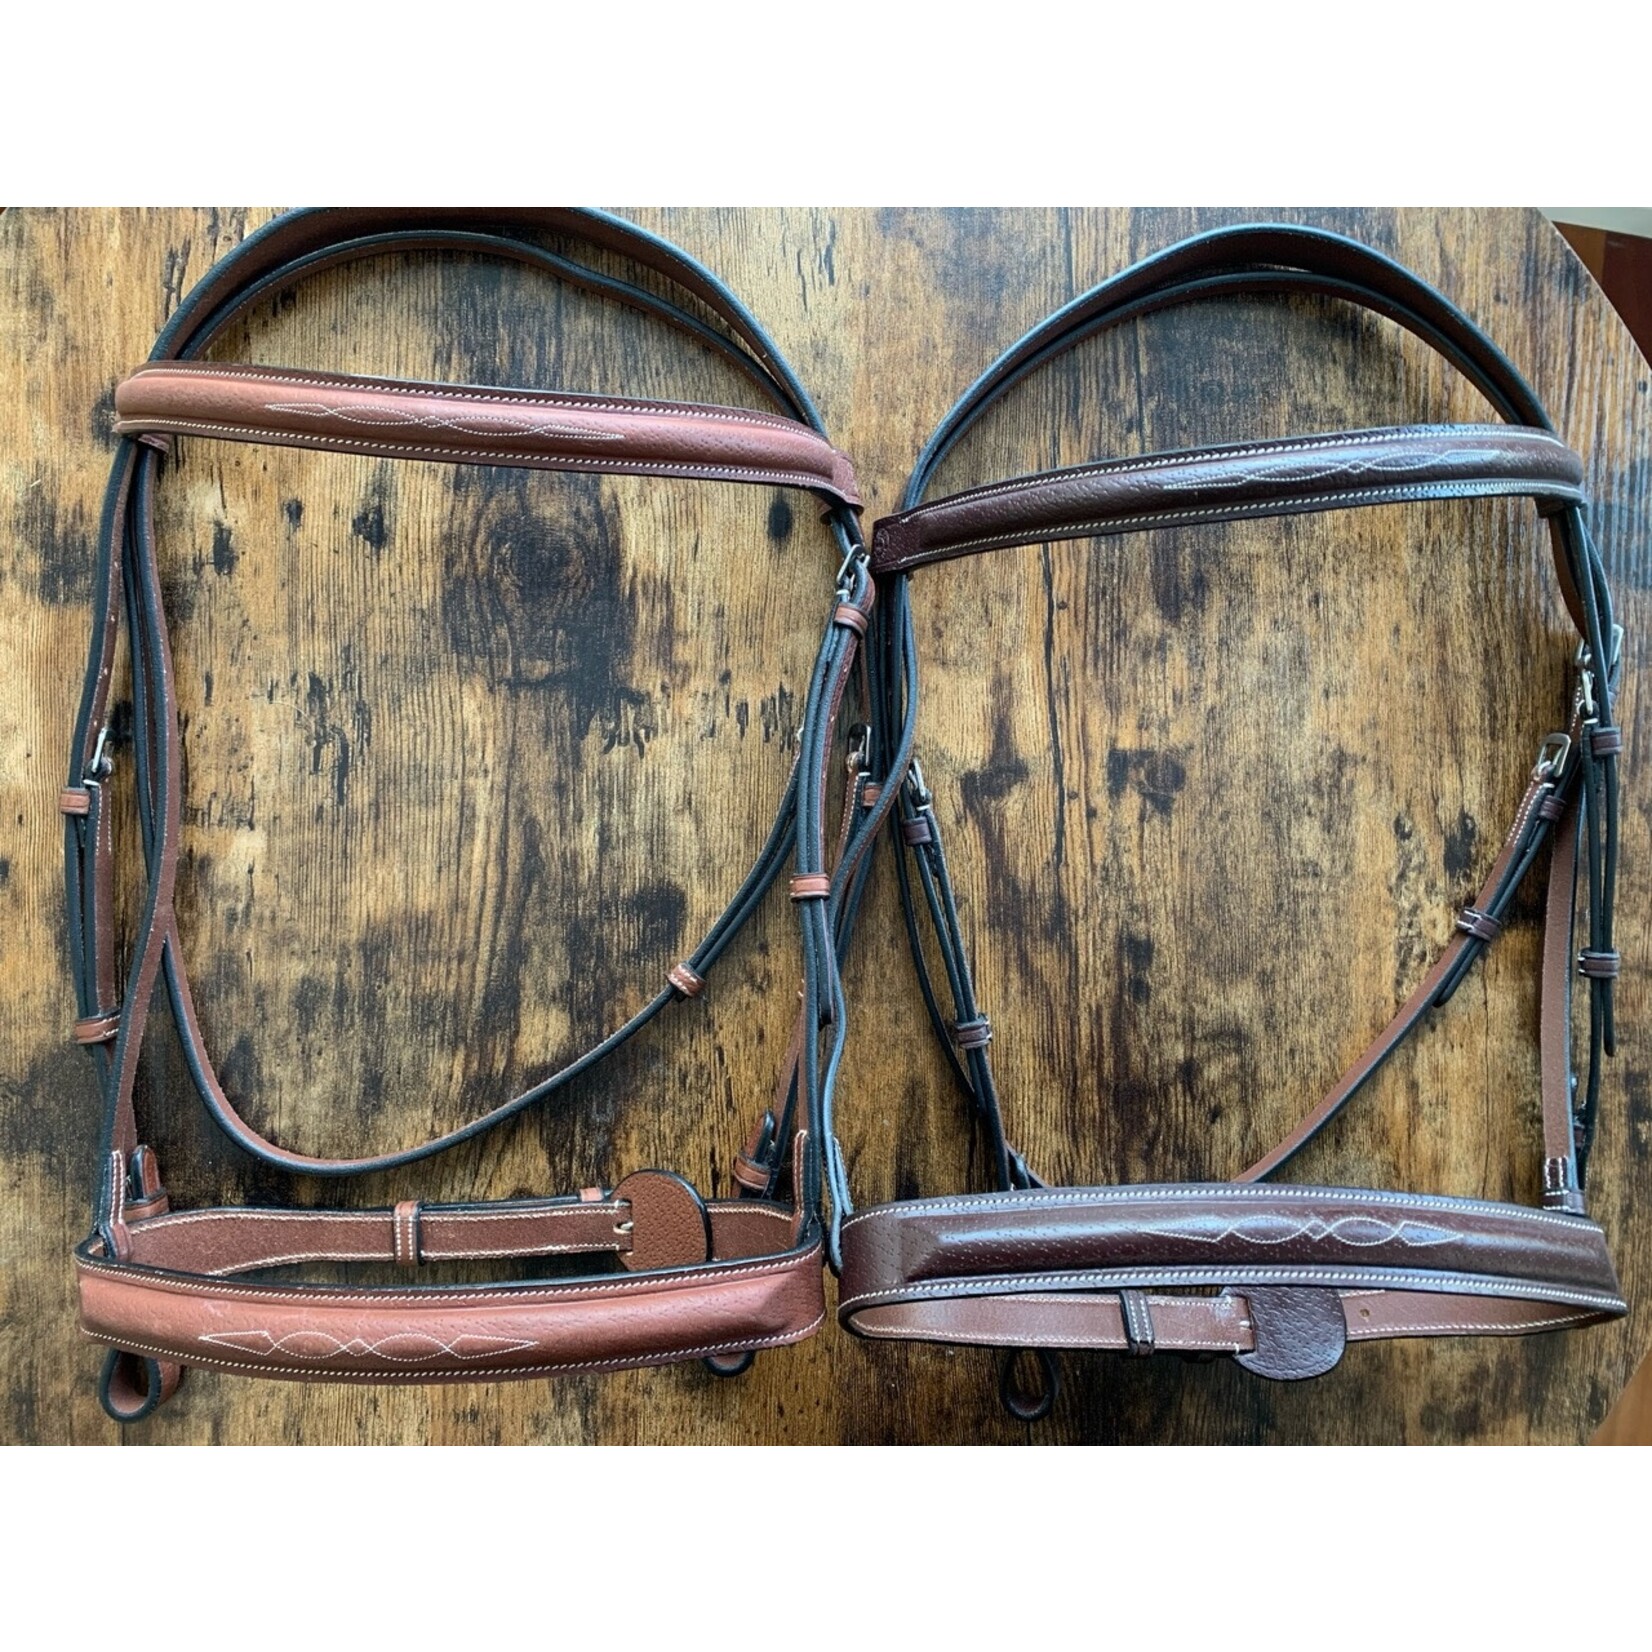 Butet BRS03 *NEW Butet Hunter Bridle Padded Wide noseband, Raised Fancy Stitched, Classic Crown Piece,  includes Bridle Bag